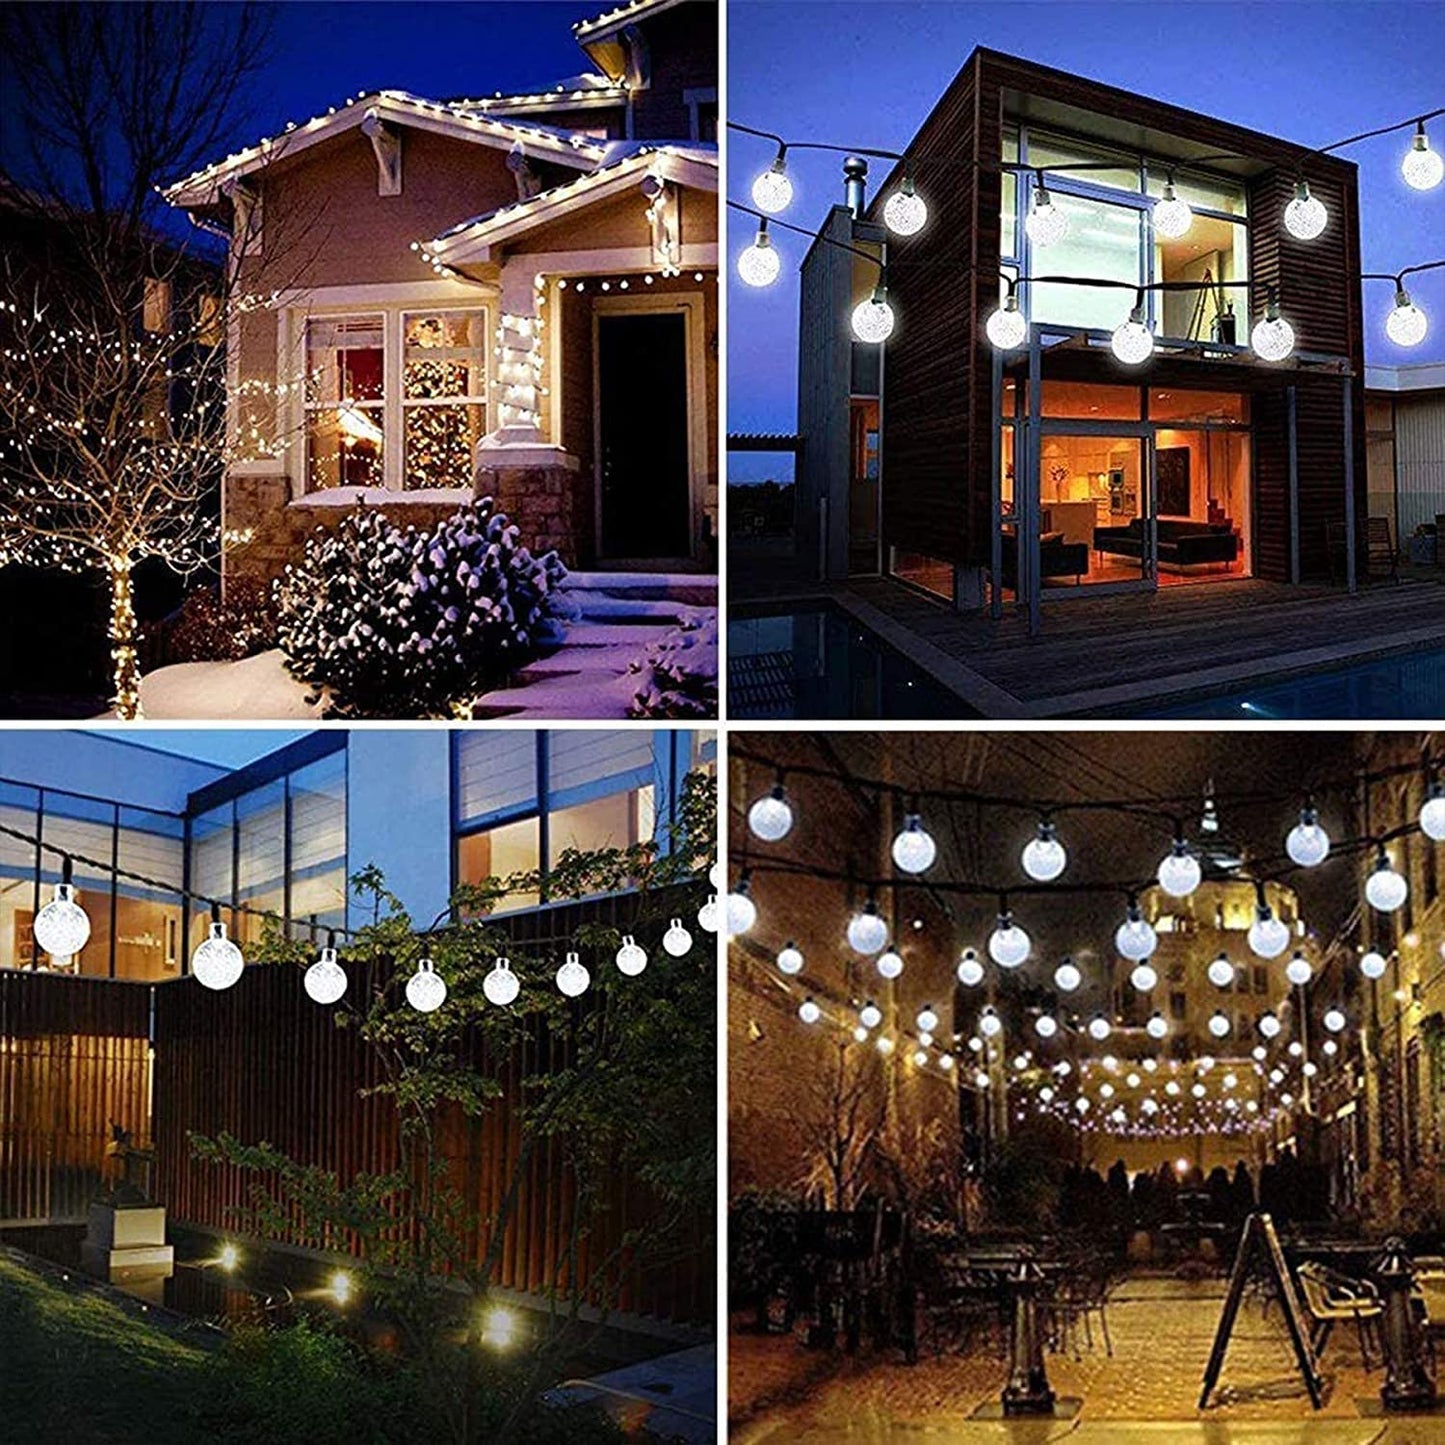 Solar Lights Outdoor Garden, 5M 30LED Solar Fairy Lights with 8 Modes Solar String Lights Waterproof for Outdoor/Indoor, Home, ,Wedding, Party, Festival, Christmas Decorations(Cool White)